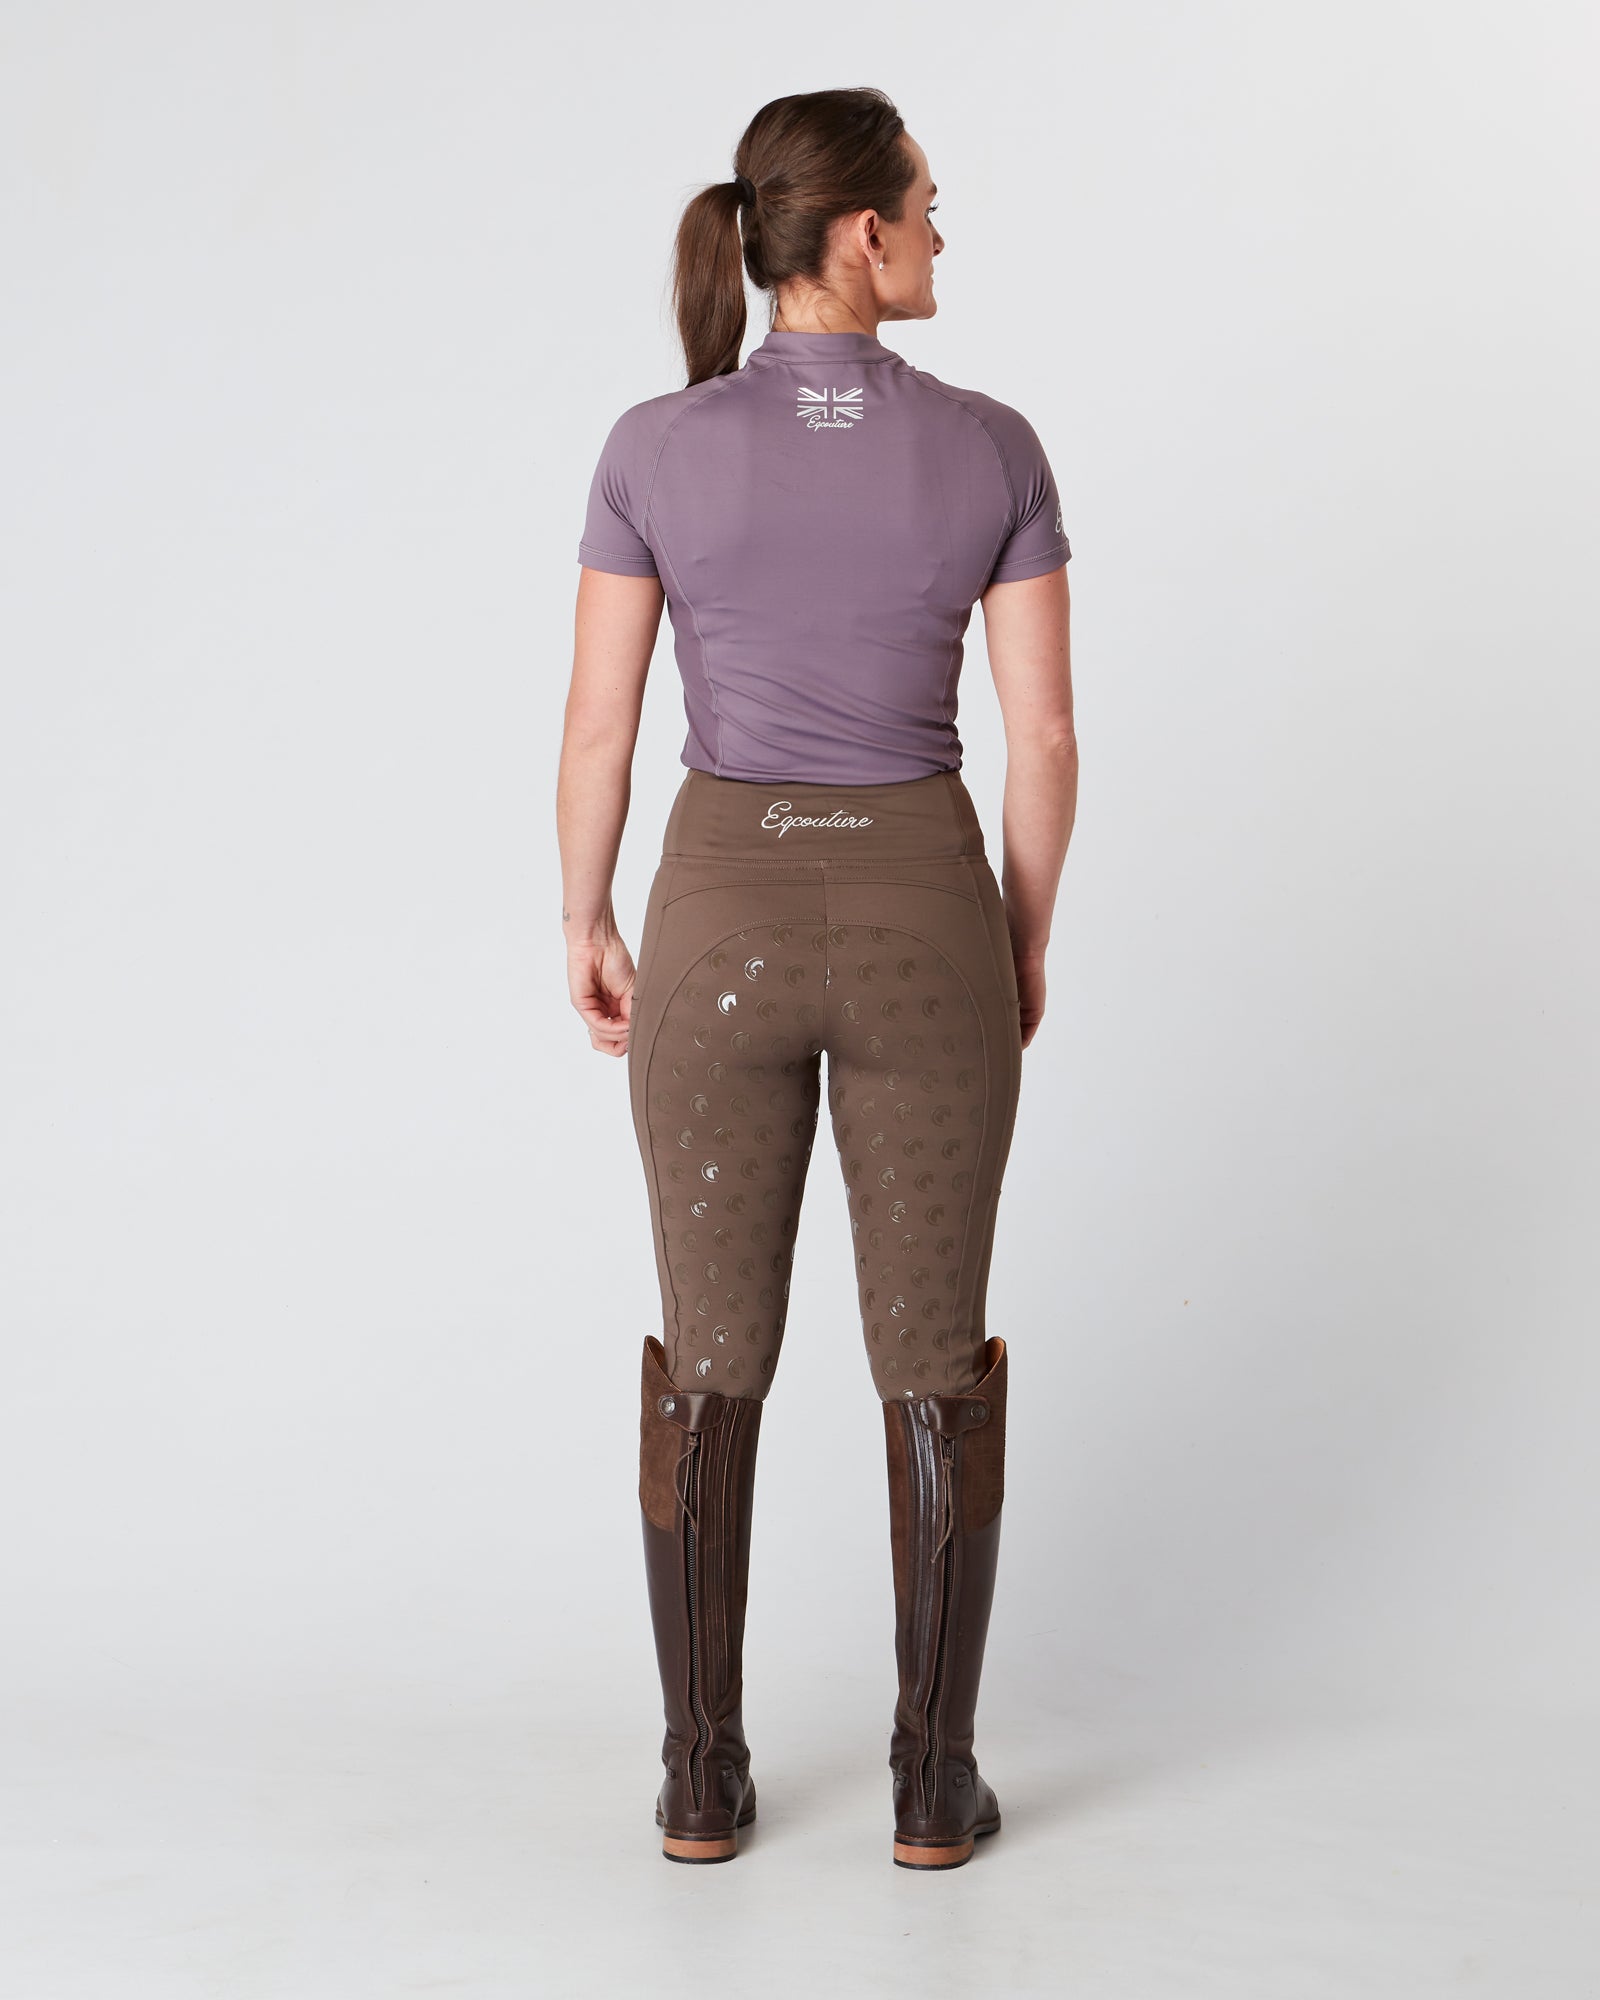 Equestrian mauve short sleeve riding top / base layer / sports riding top- Eqcouture.